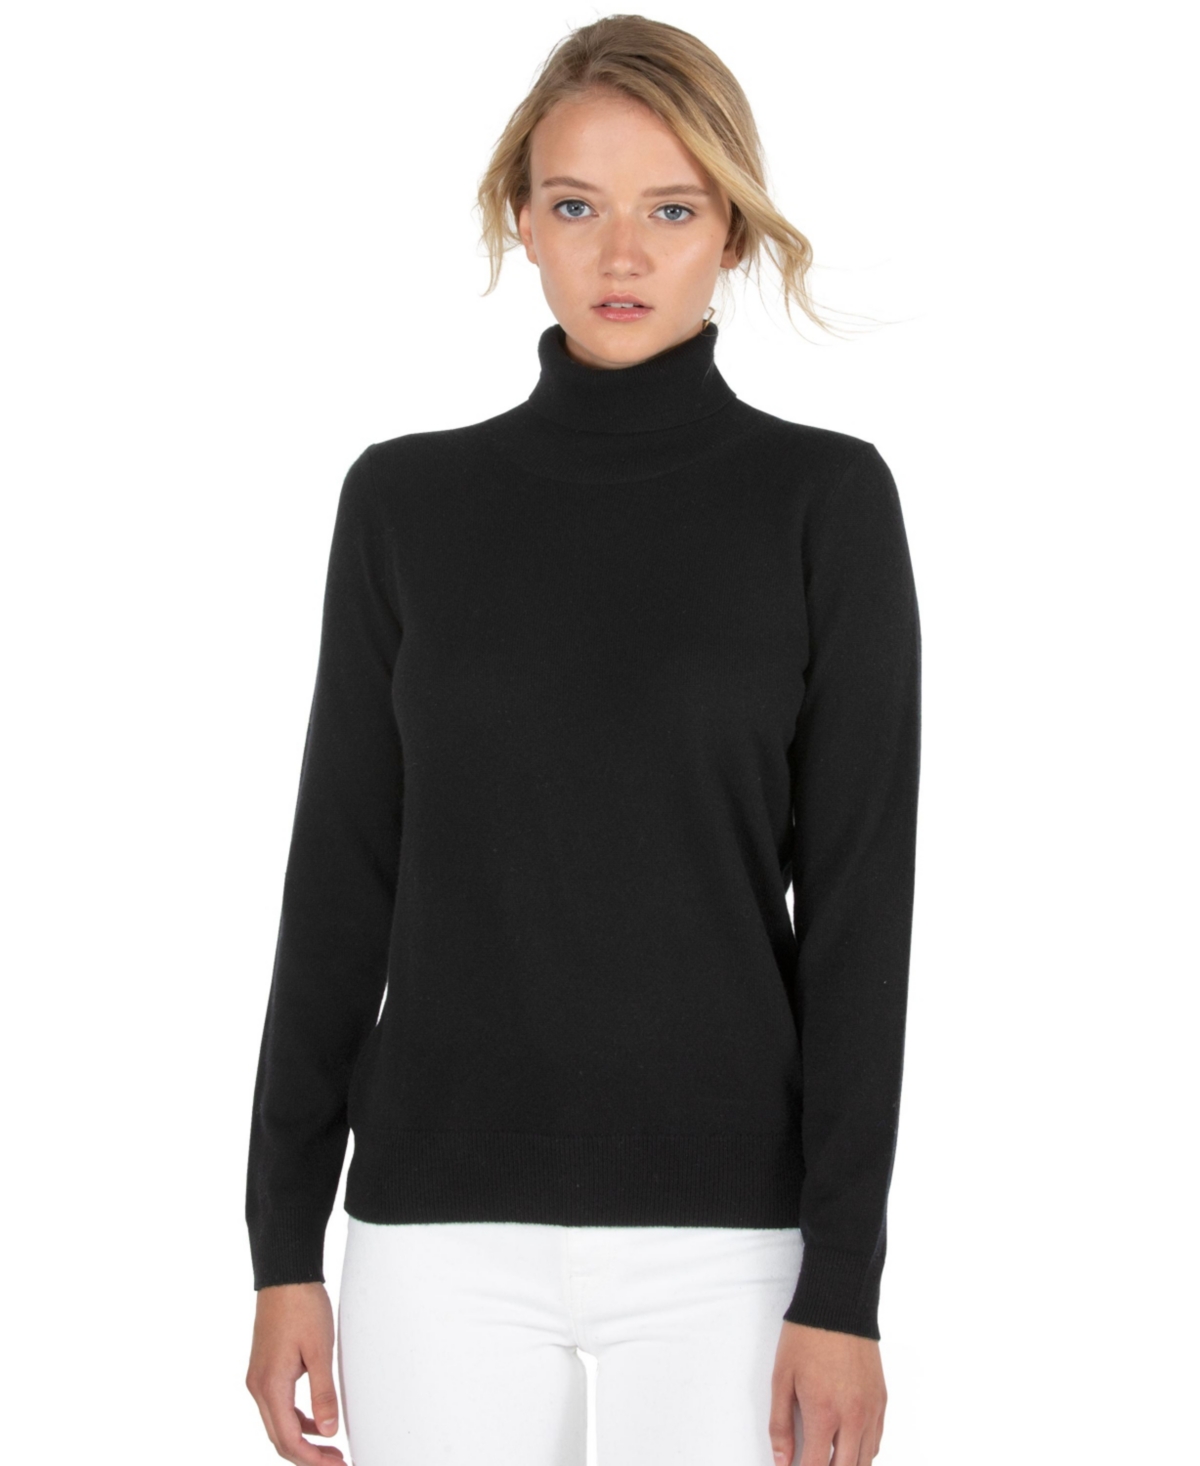 Women's 100% Pure Cashmere Long Sleeve Turtleneck Pullover Sweater - Black